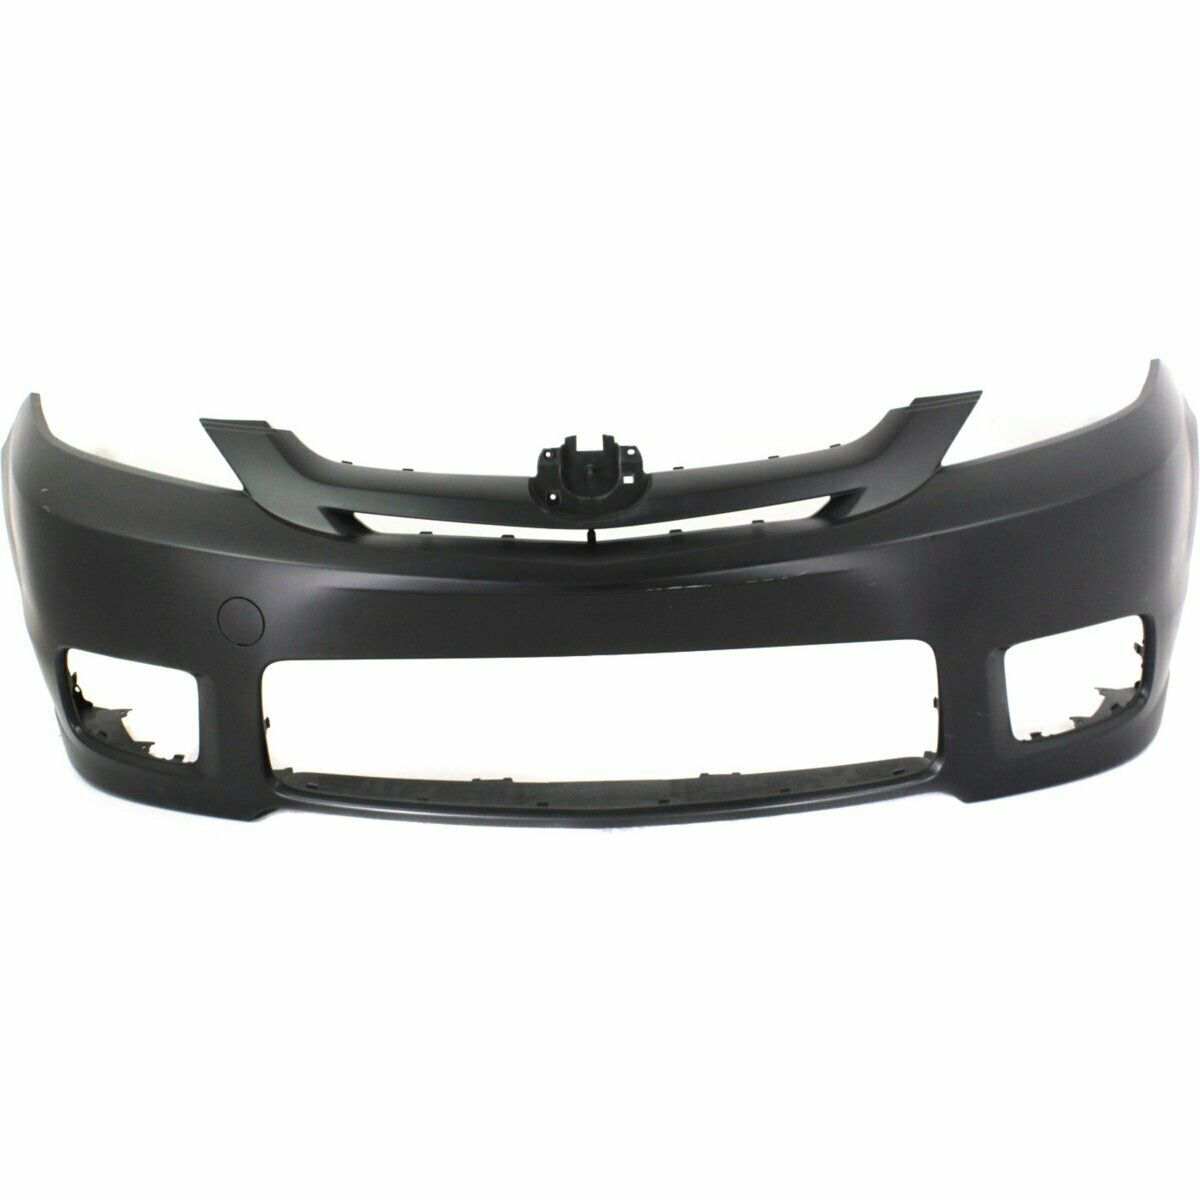 2006-2007 Mazda 5 Front Bumper Painted to Match